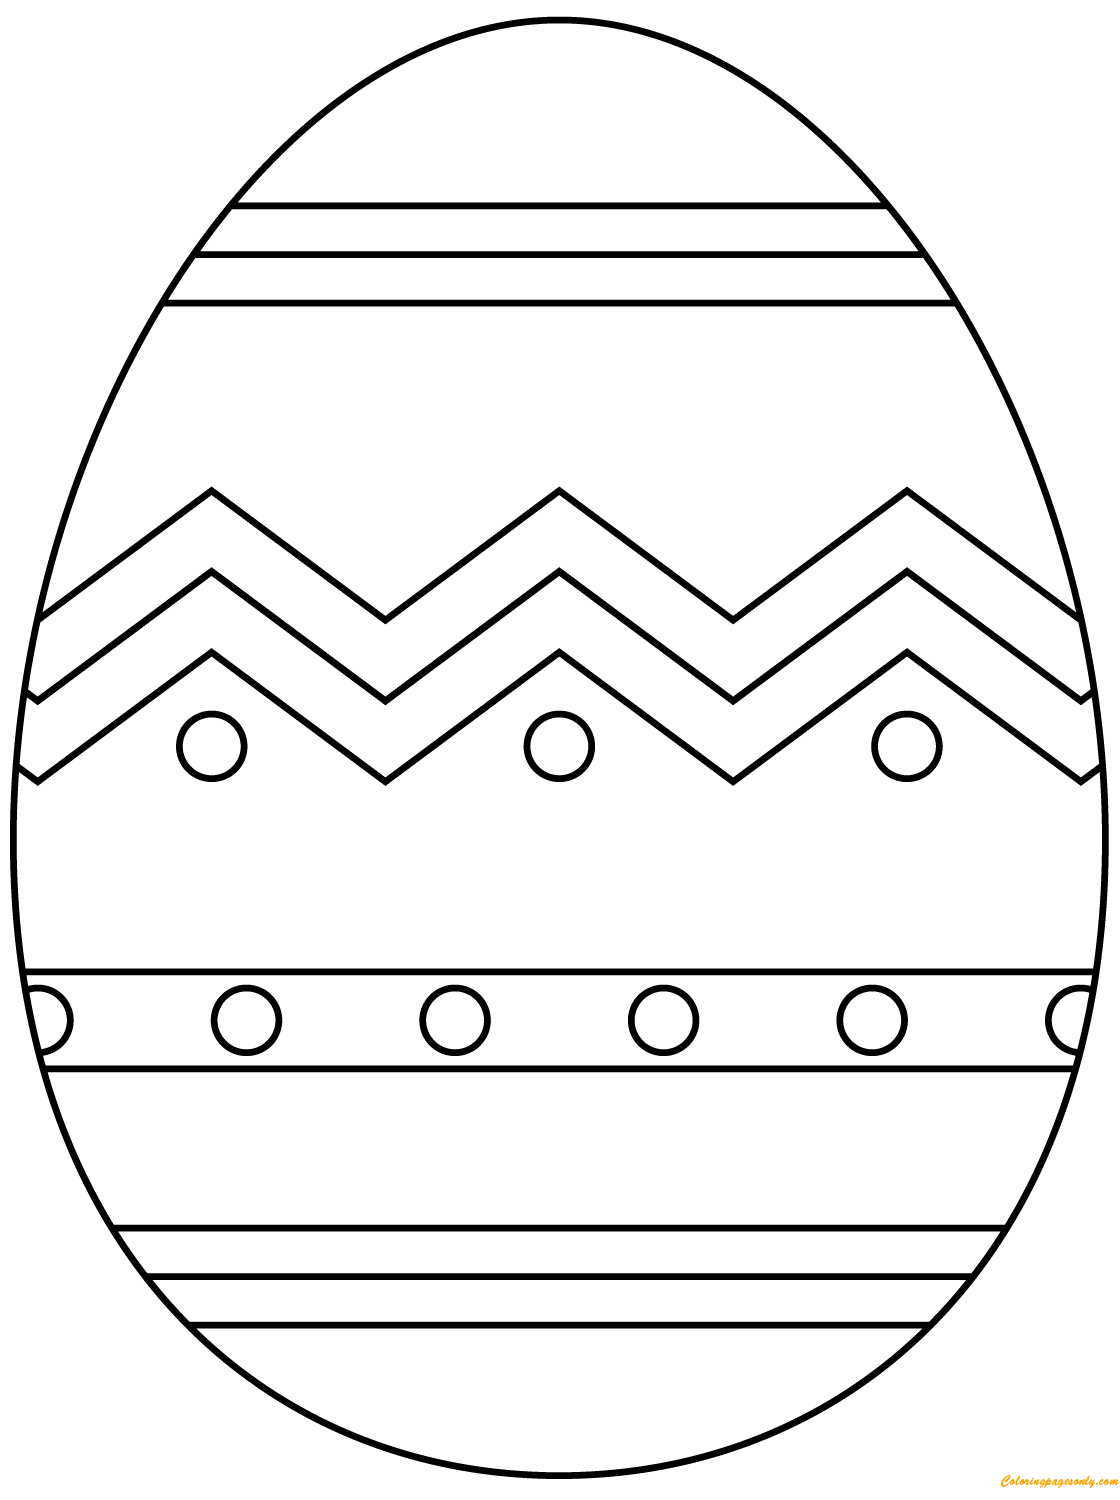 Abstract Pattern Easter Egg Coloring Pages - Arts ...